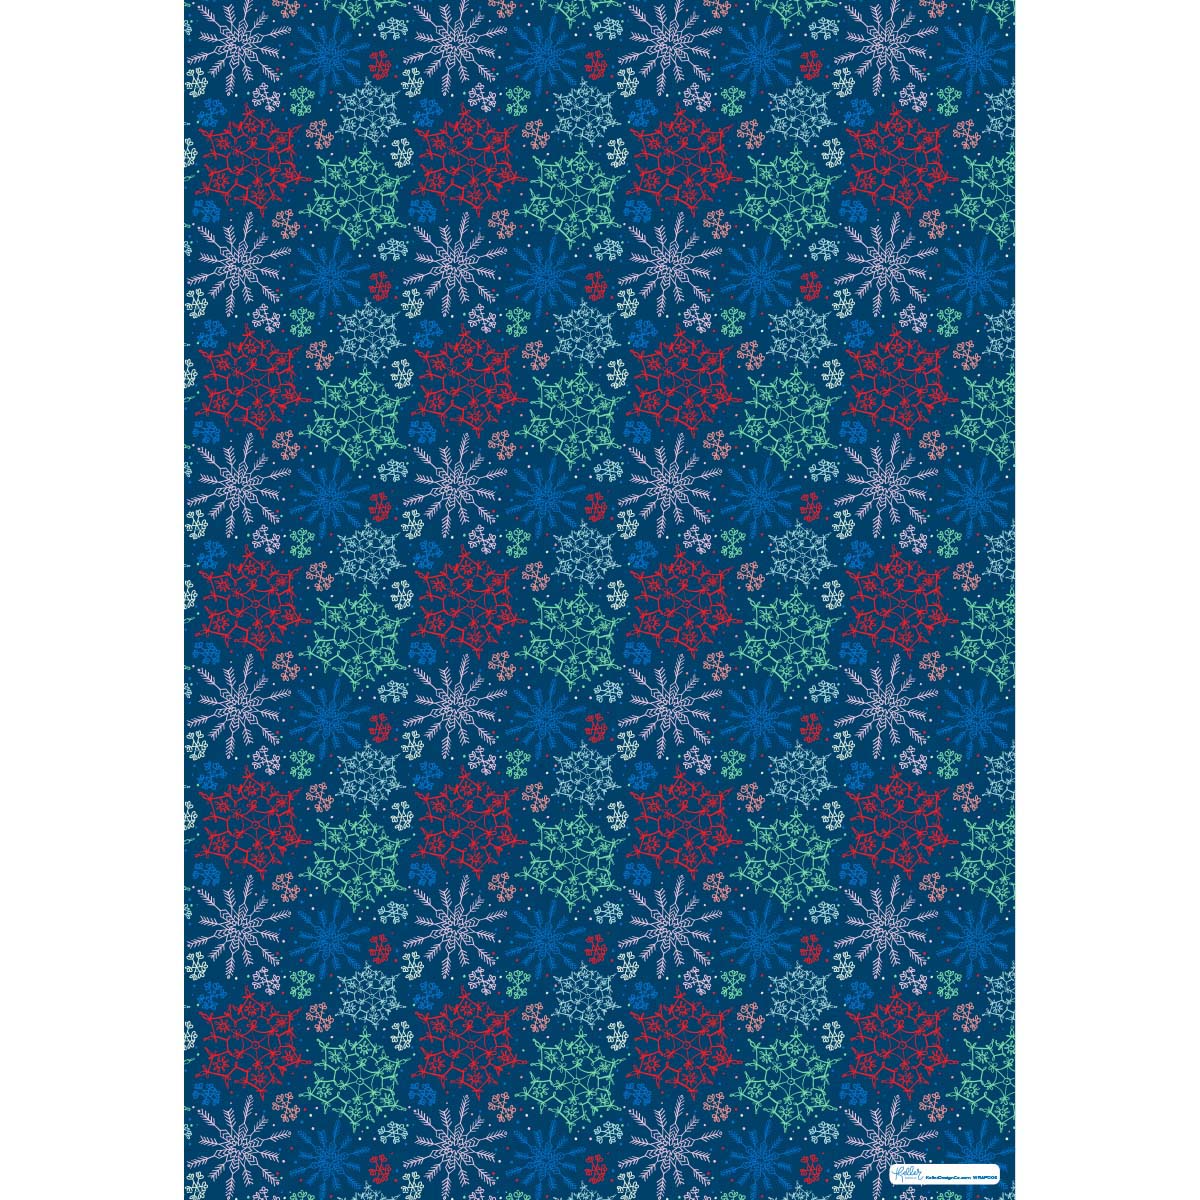 Let it Snow-Navy Gift Wrap-3 Sheets